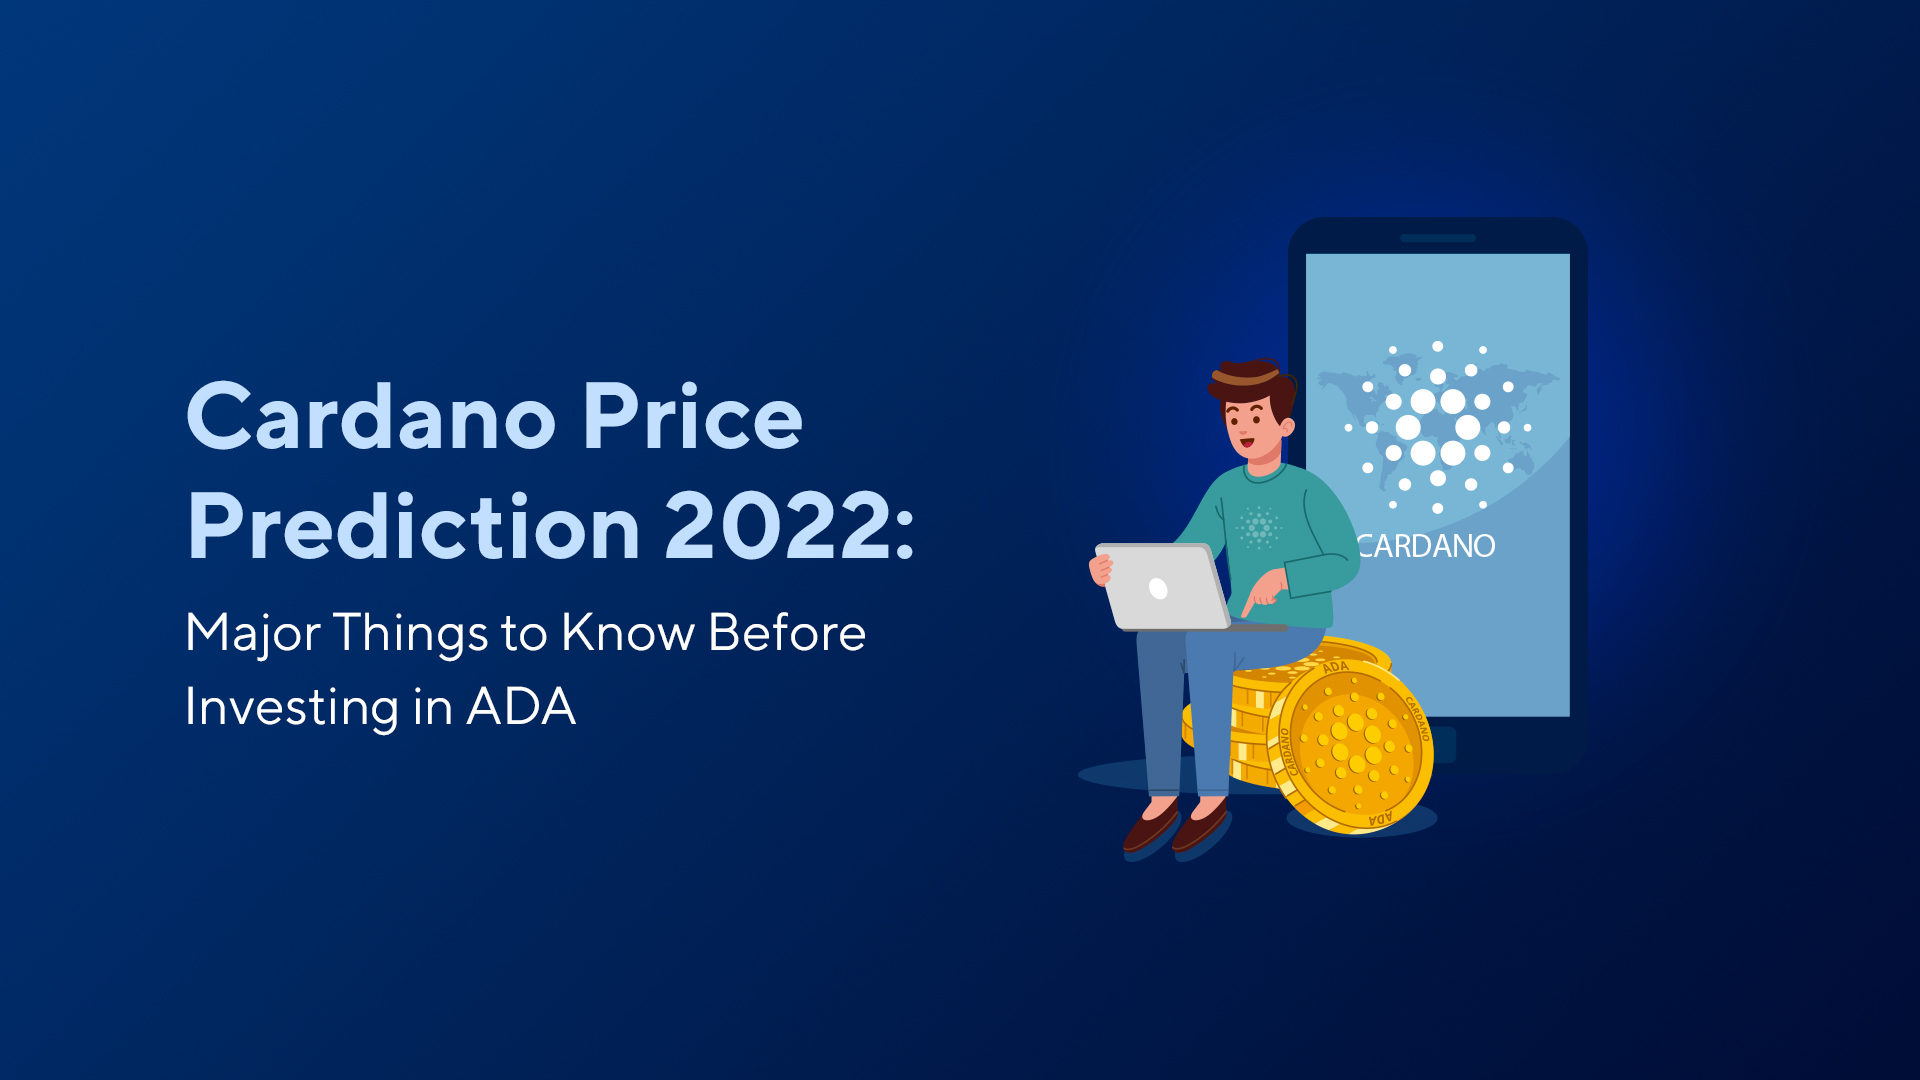 Cardano Price Prediction 2022: Major Things to Know Before Investing in ADA